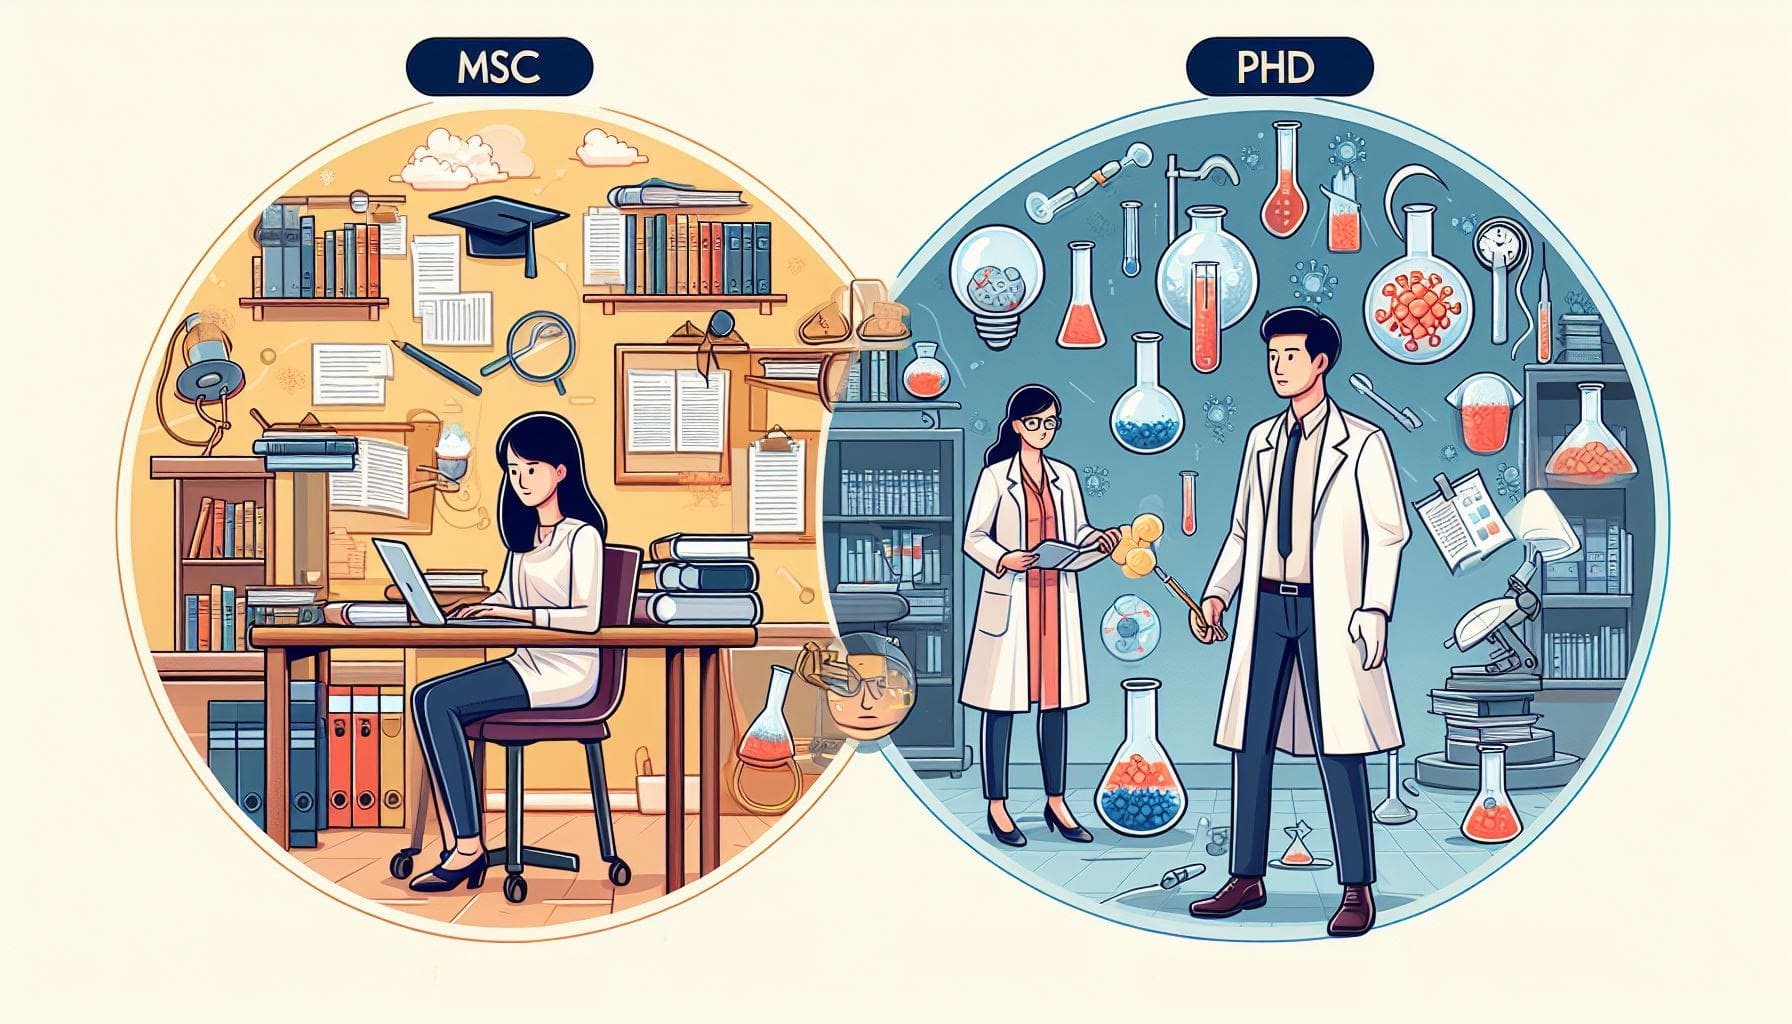 apply for PhD during masters. On the left is a girl doing masters and on the right is the girl and boy working in a lab doing PhD work.